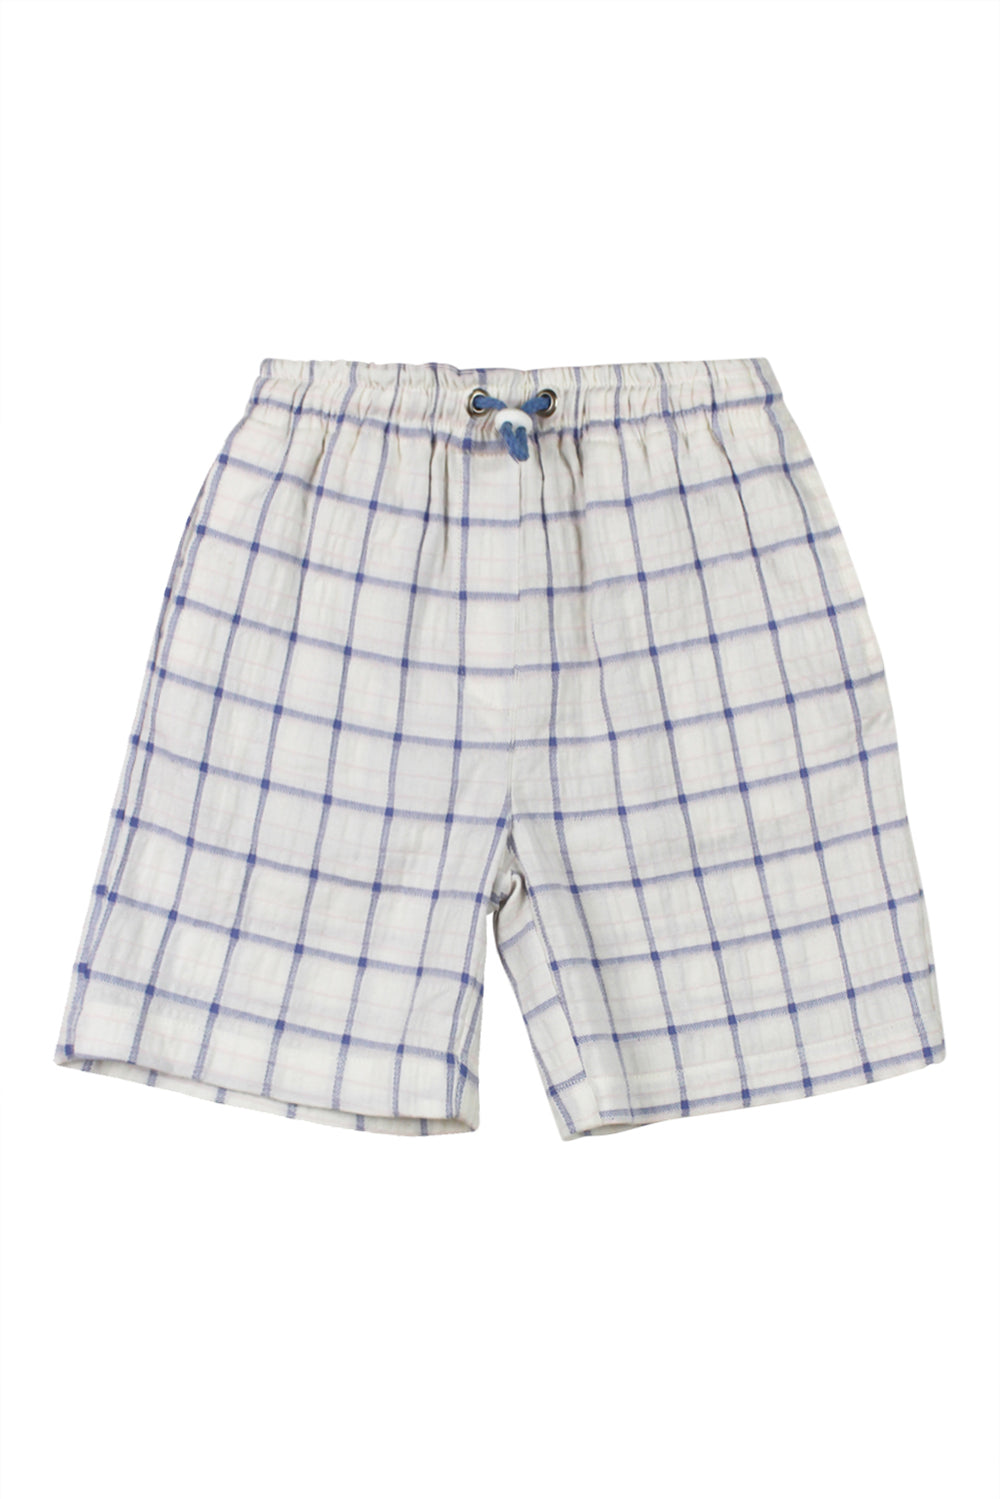 Chill RP Shorts